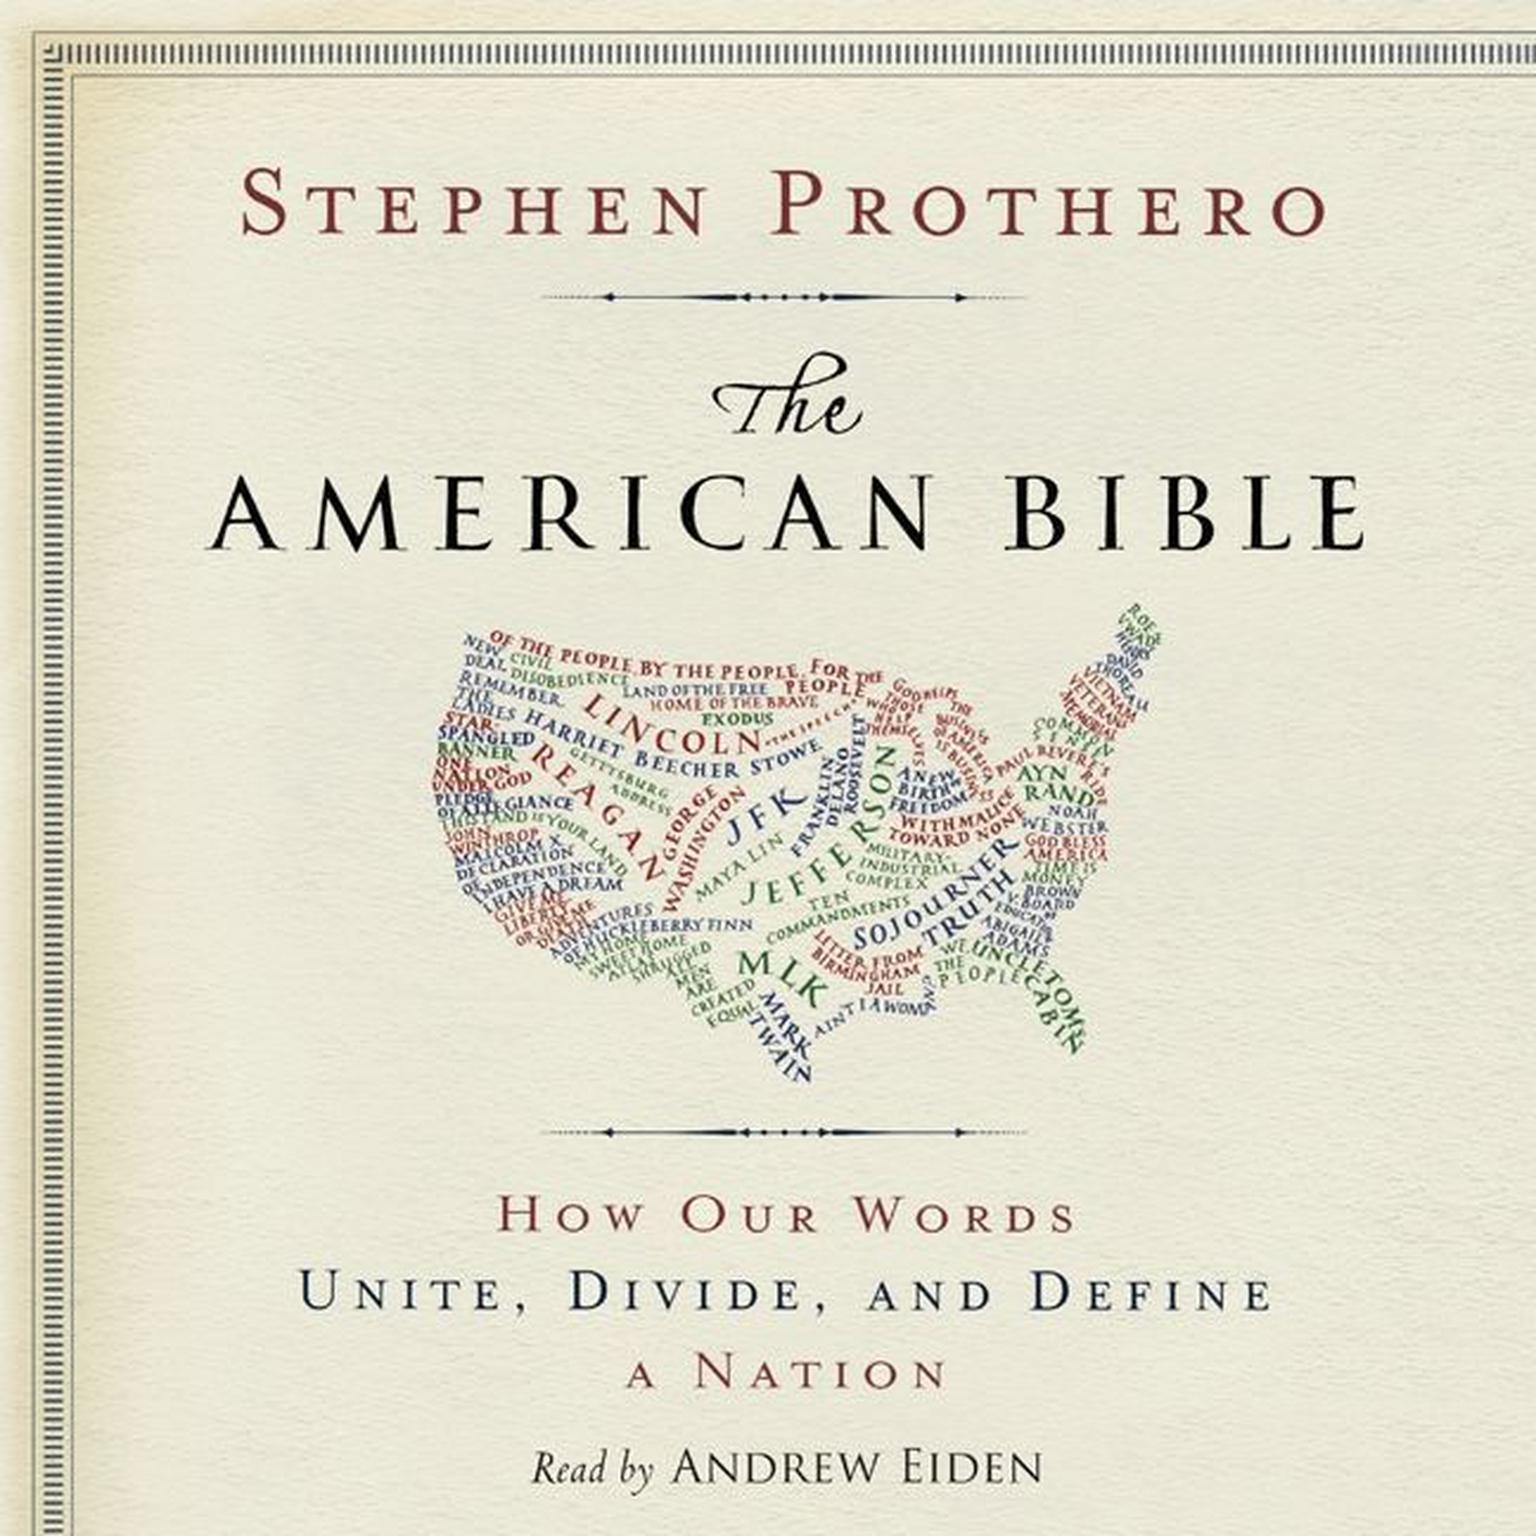 The American Bible: How Our Words Unite, Divide, and Define a Nation Audiobook, by Stephen Prothero